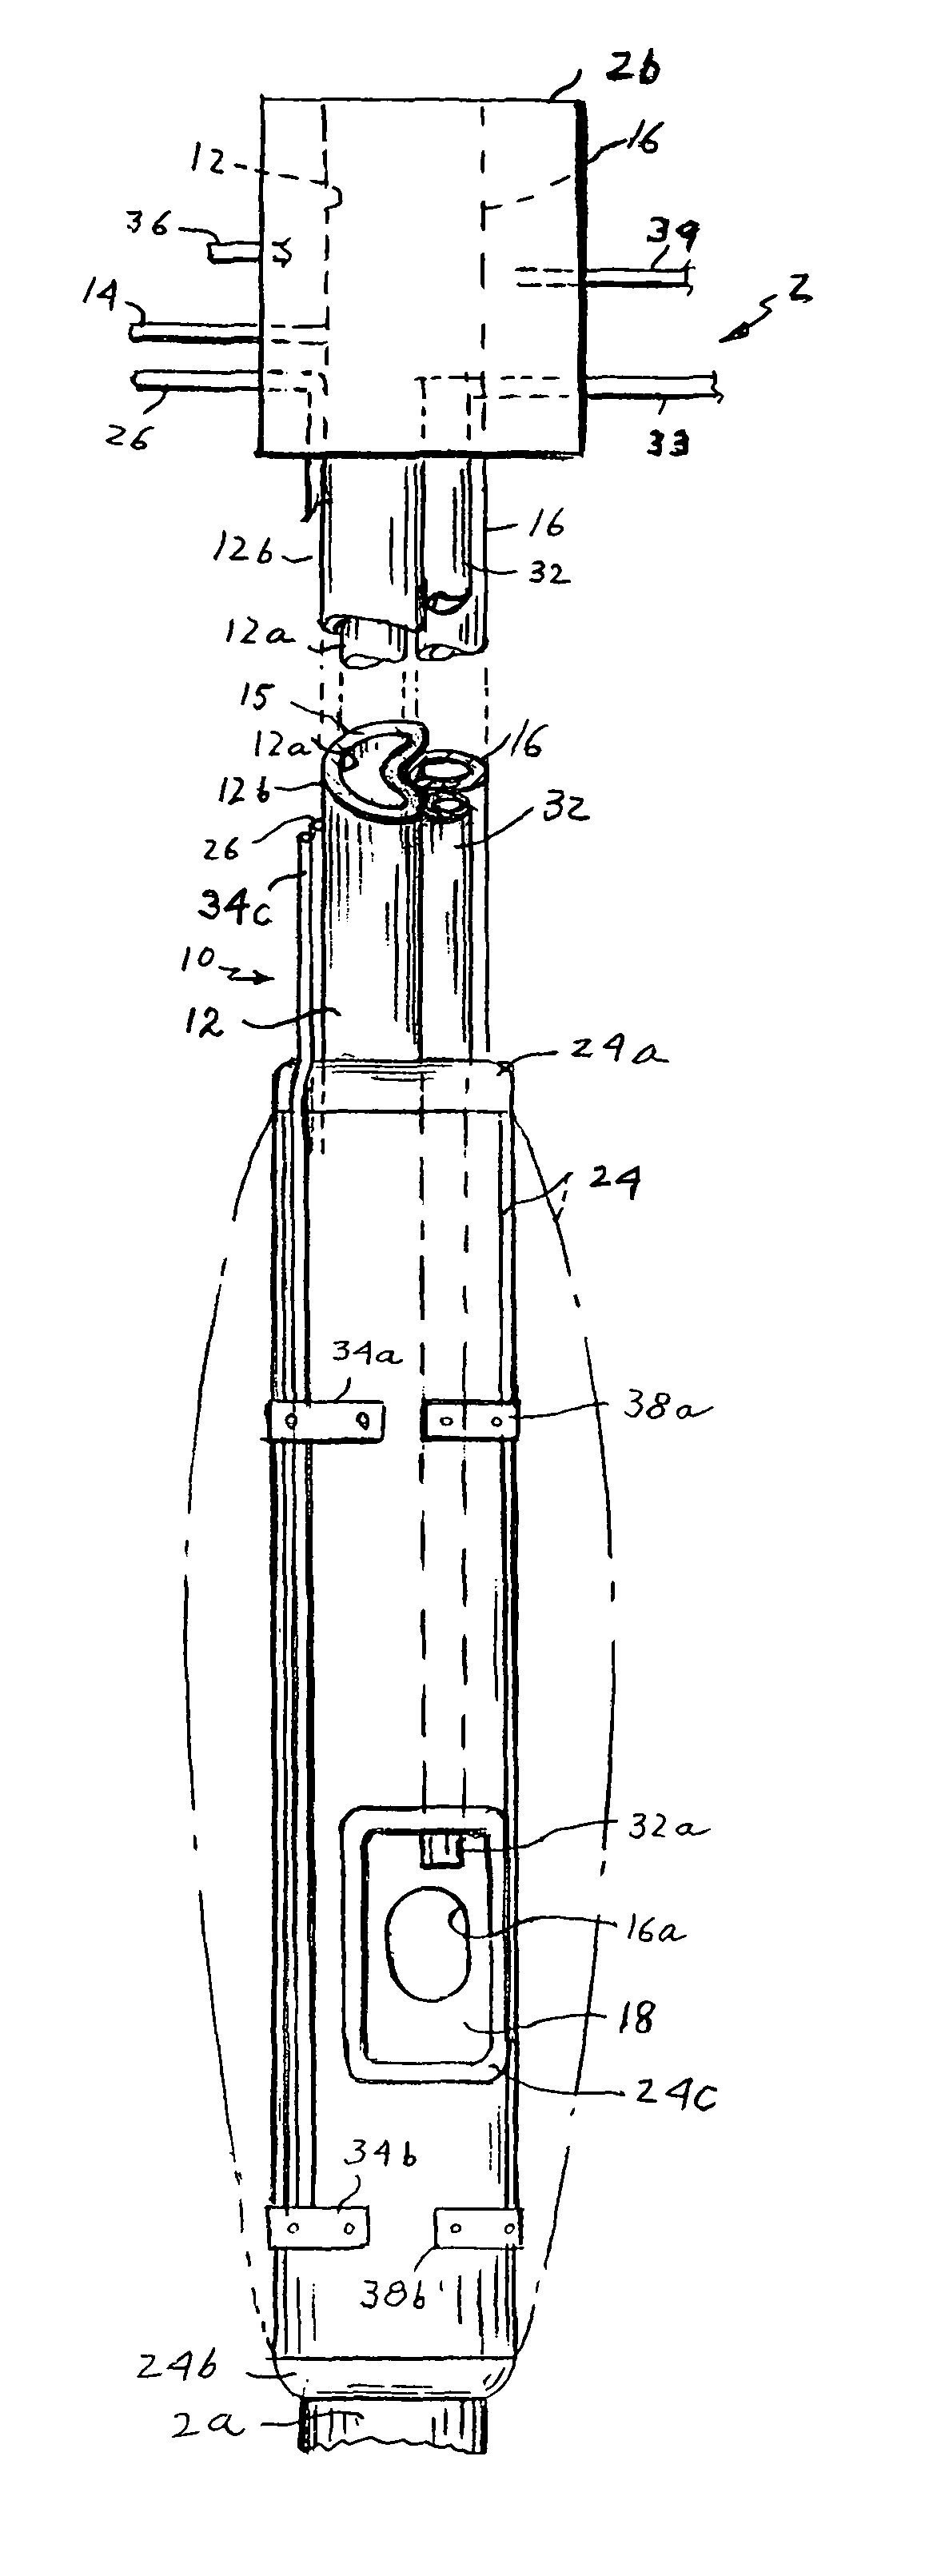 Method and apparatus for performing transgastric procedures